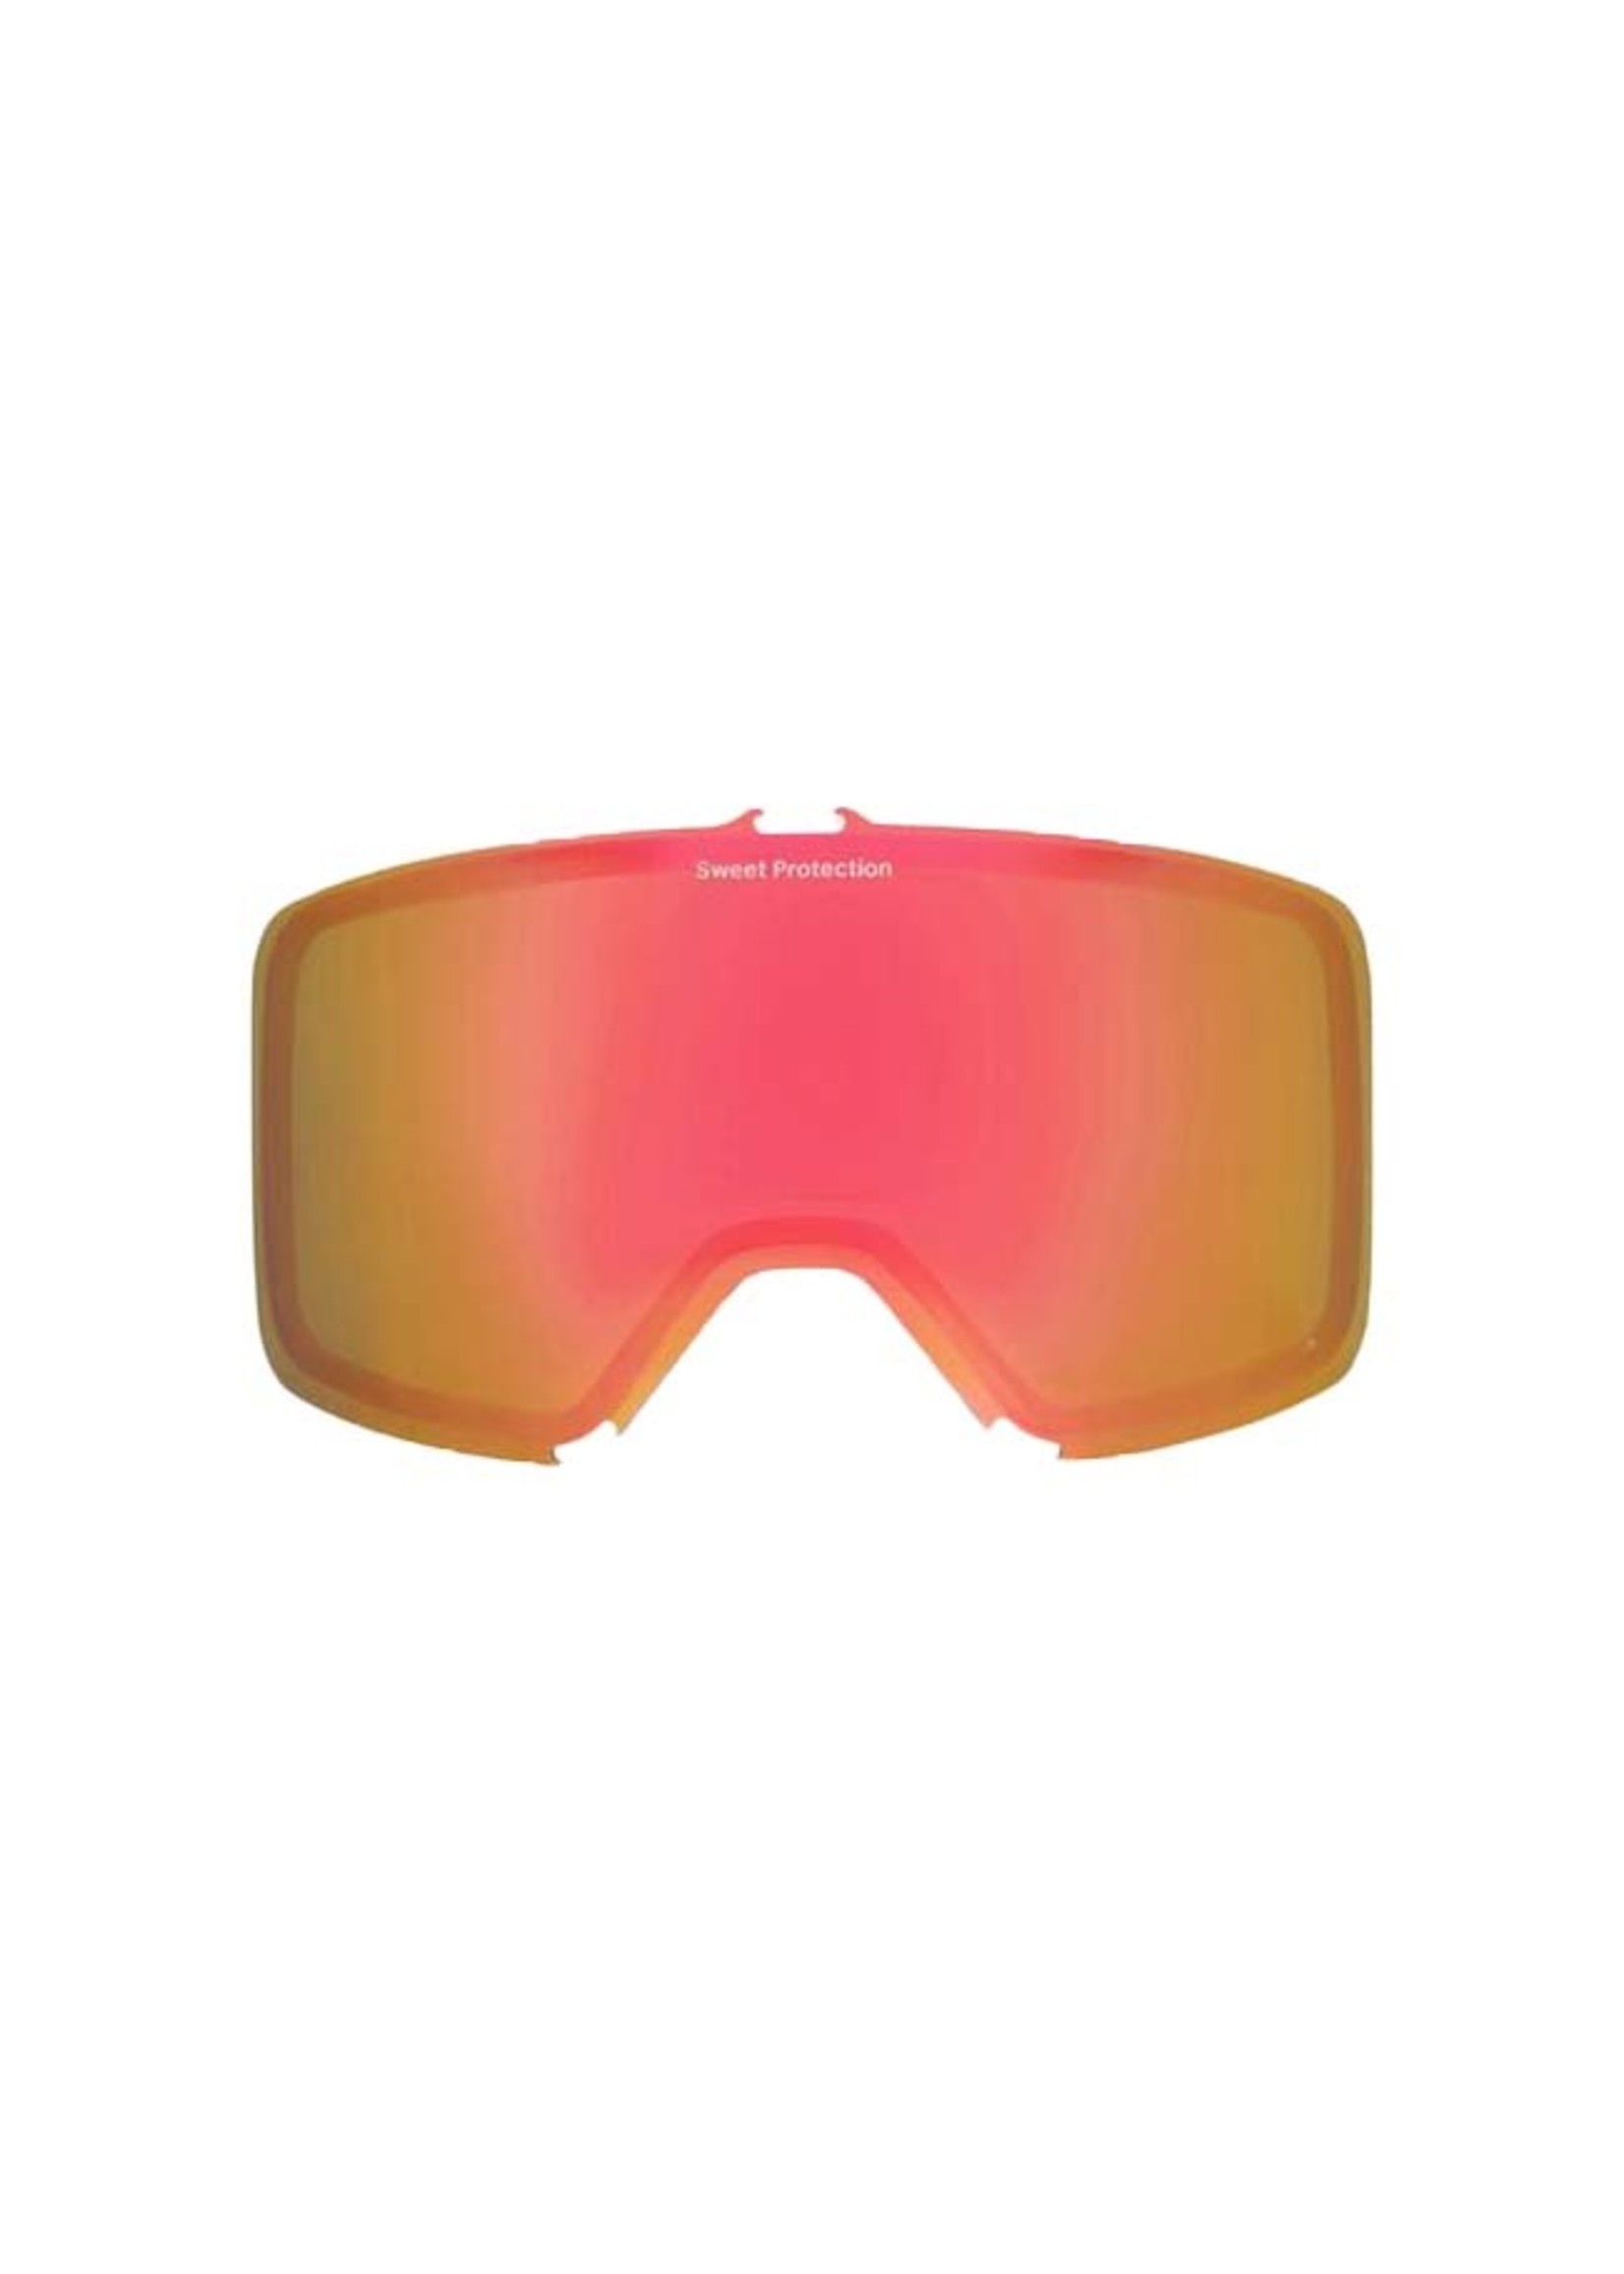 Sweet Protection Replacement Lens Bike Goggle Firewall MTB